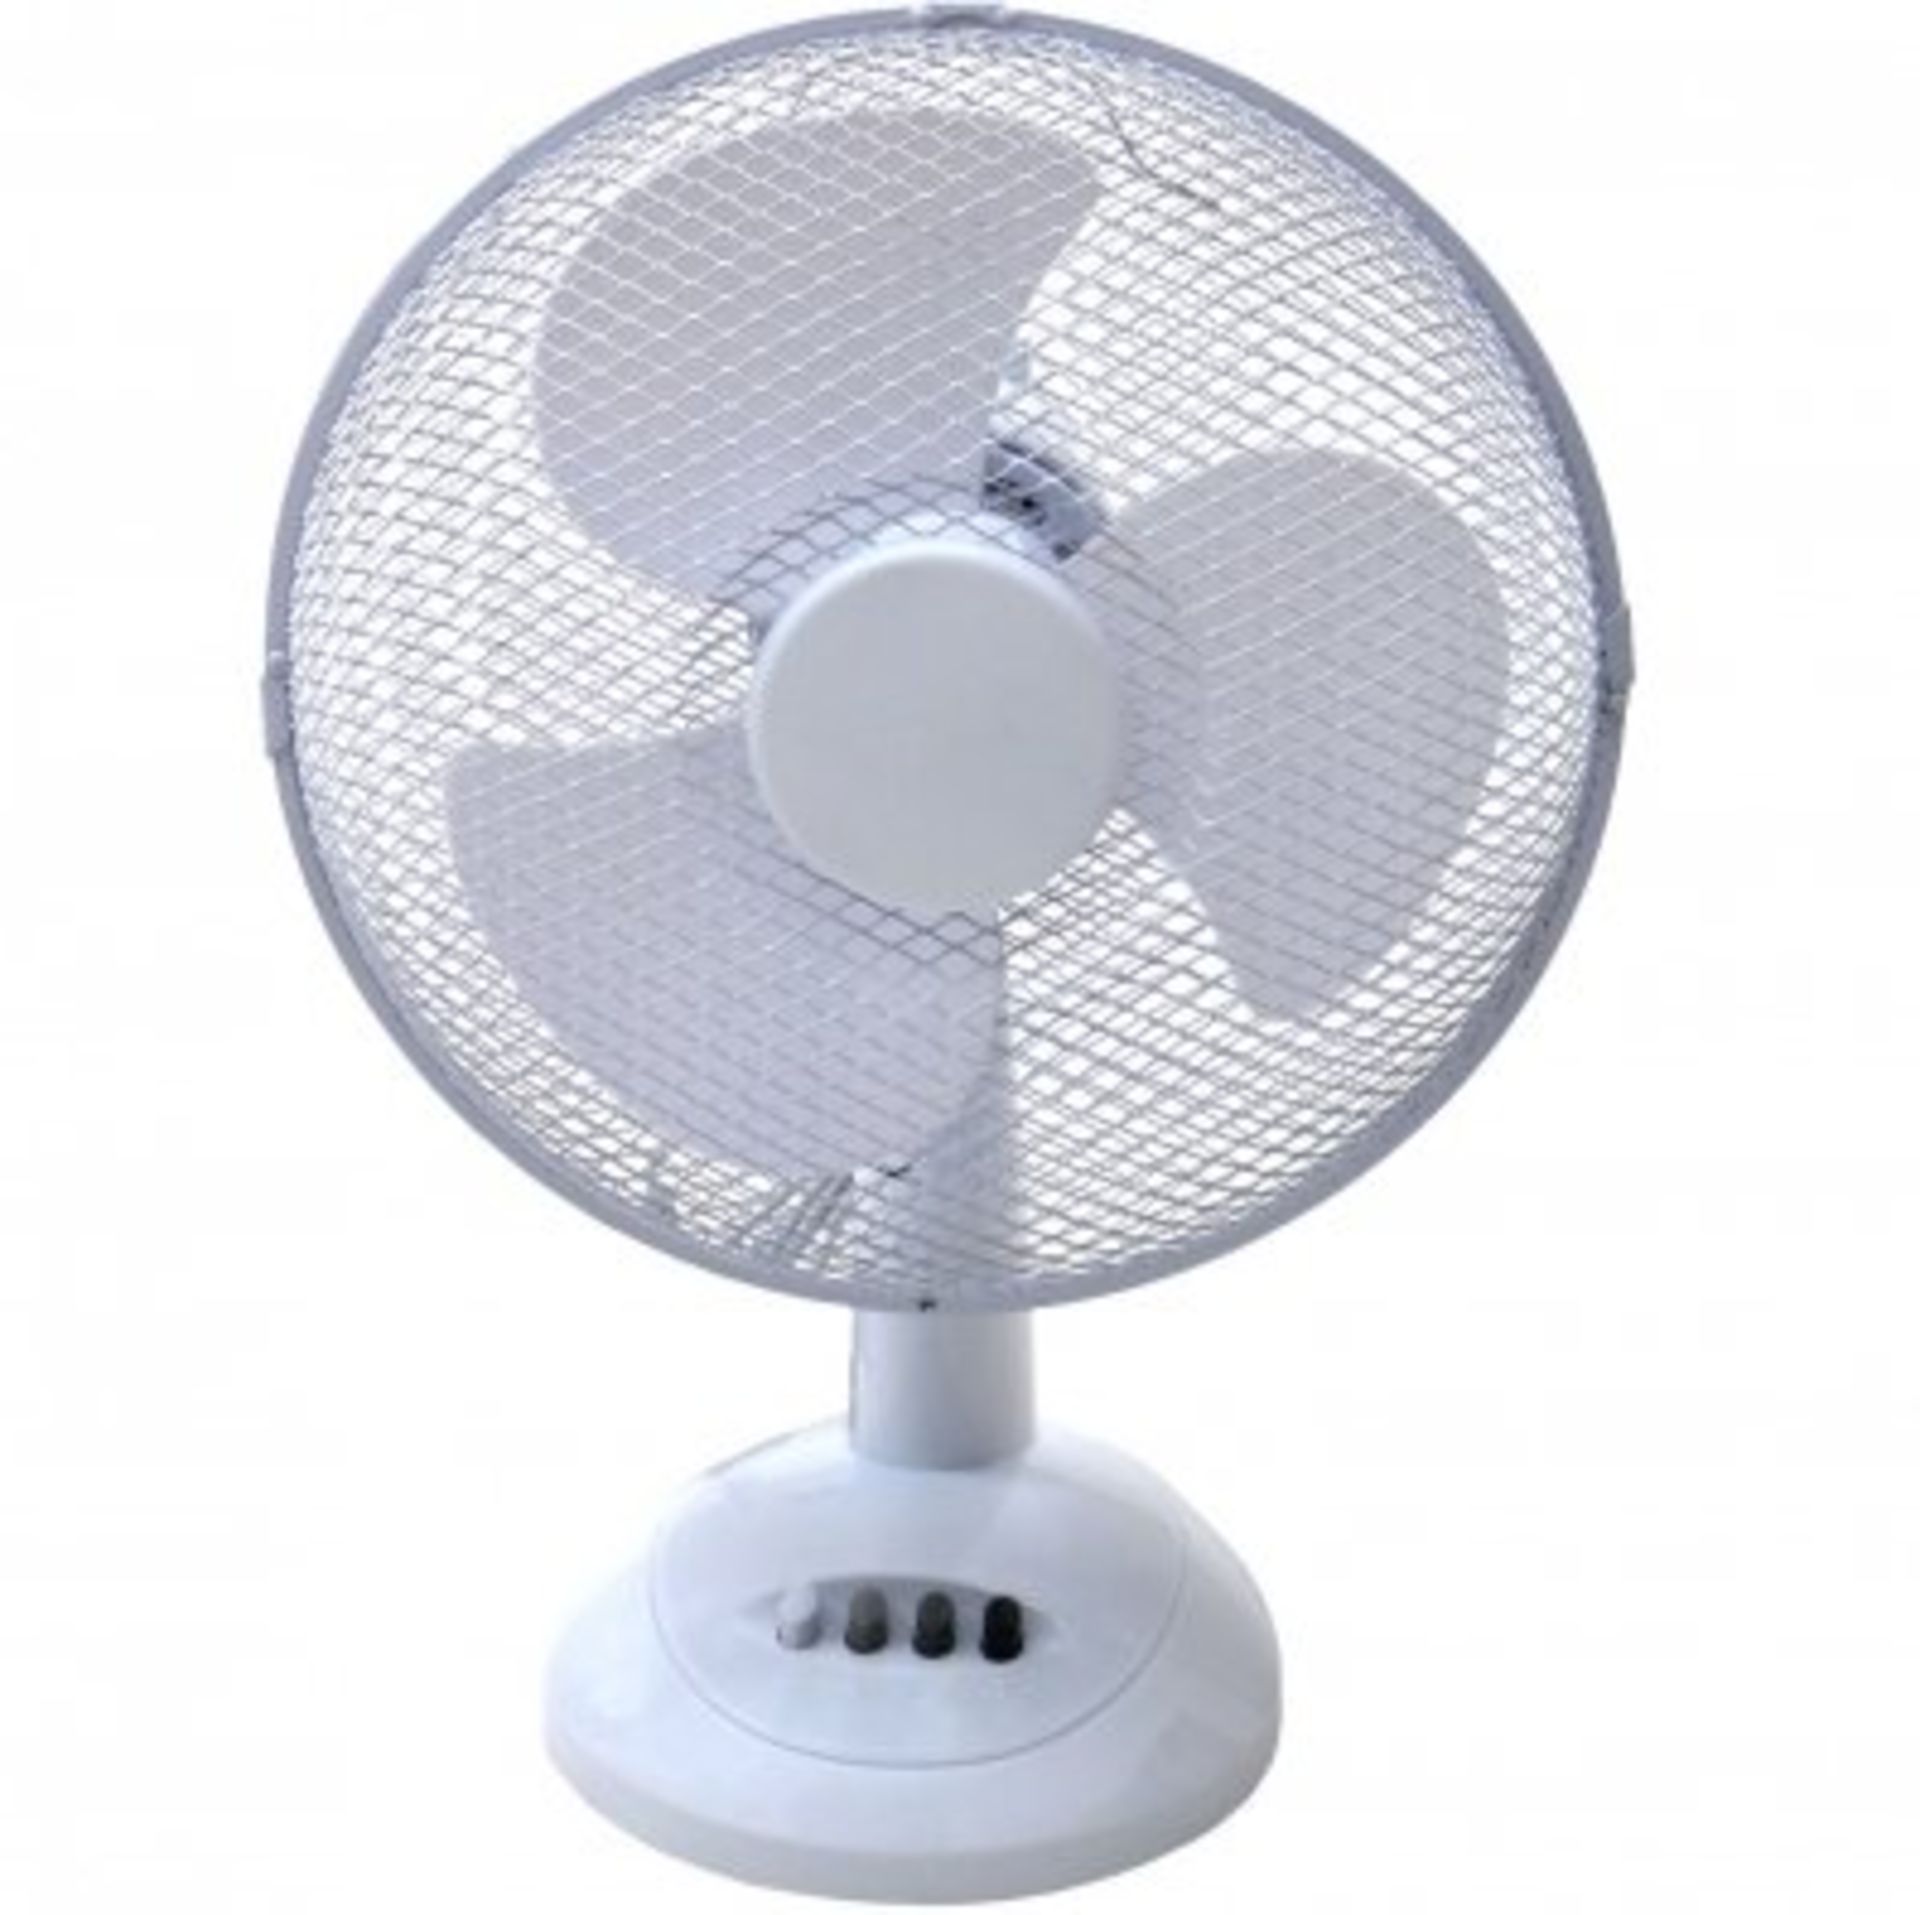 (LF193) 12" Oscillating White Desk Top Fan Stay cool this year with the 12" desk top ...